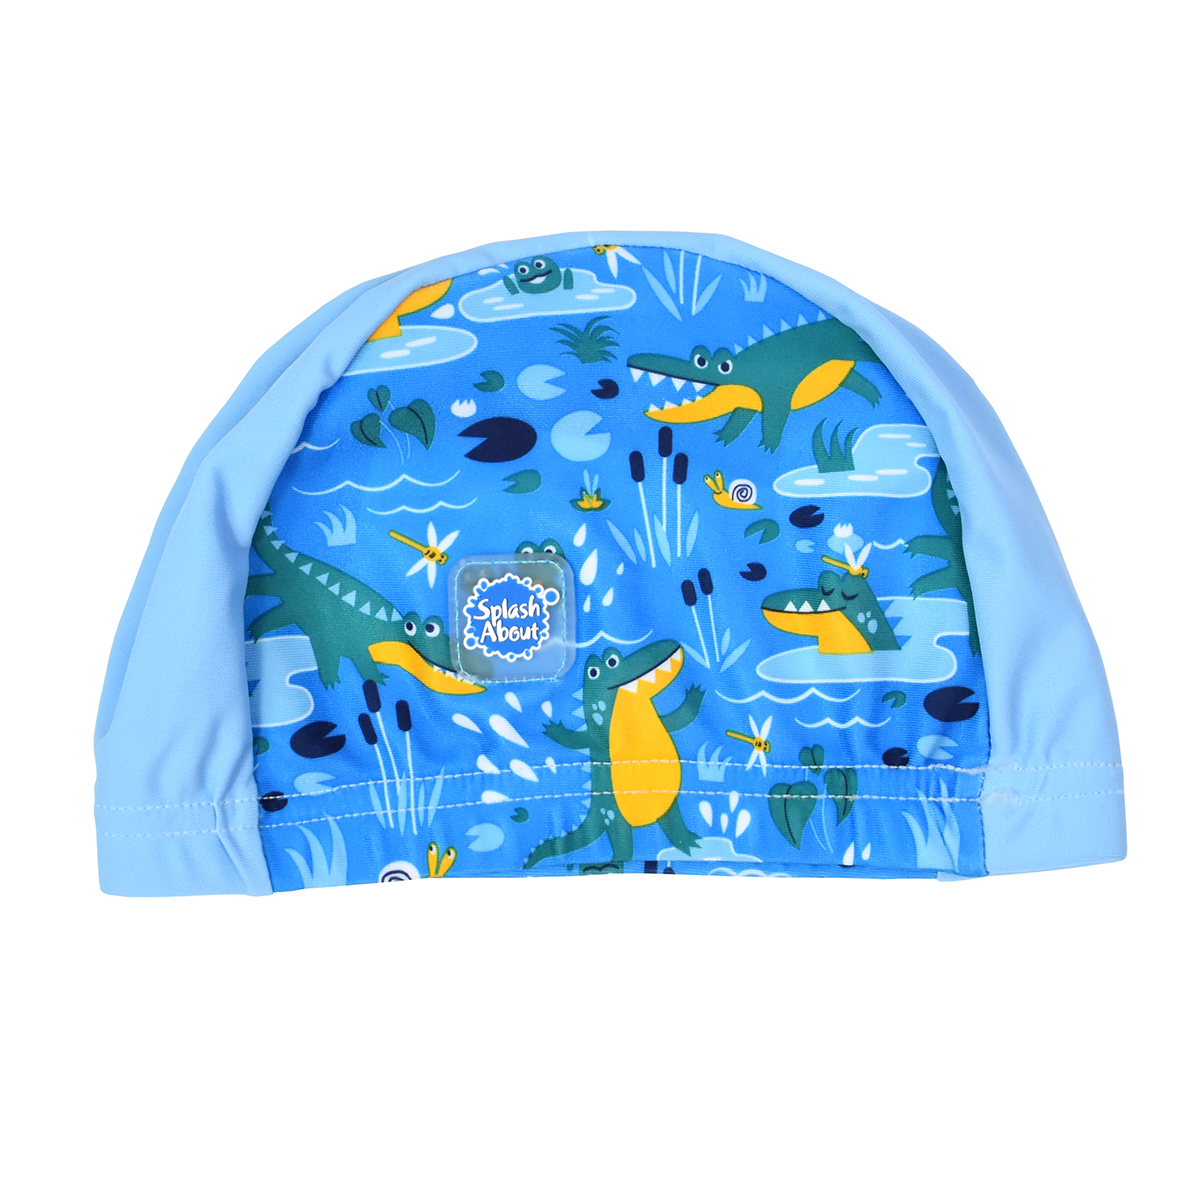 Cute baby swim hat in blue with light blue trims and swamp themed print, including crocodiles, fireflies, frogs, snails and more.